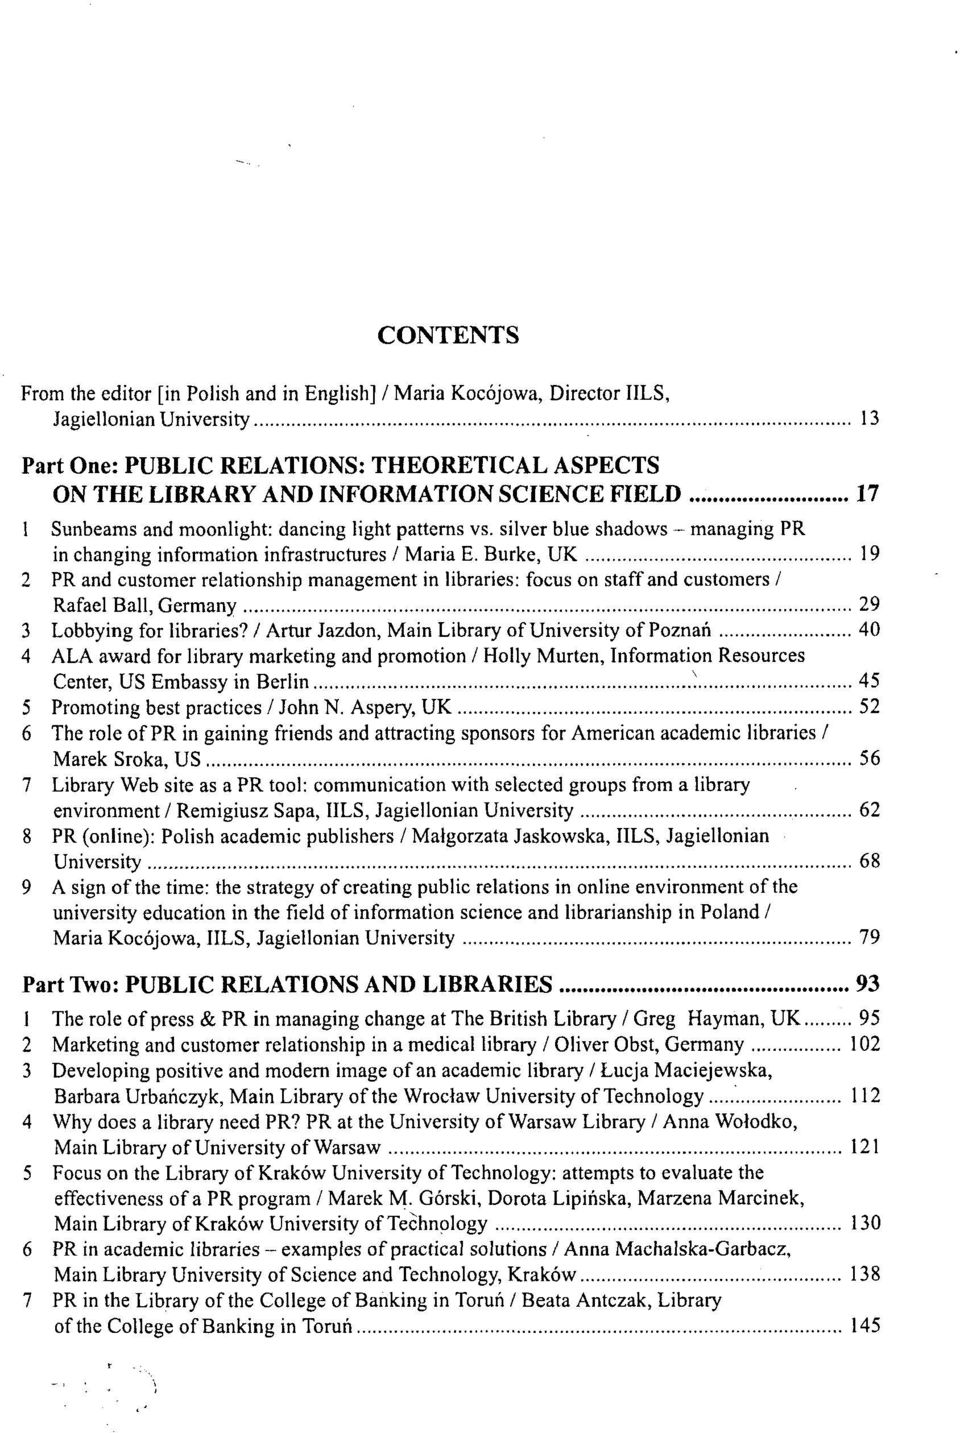 Burkę, UK 19 2 PR and customer relationship management in libraries: focus on staff and customers / Rafael Bali, Germany 29 3 Lobbying for libraries?